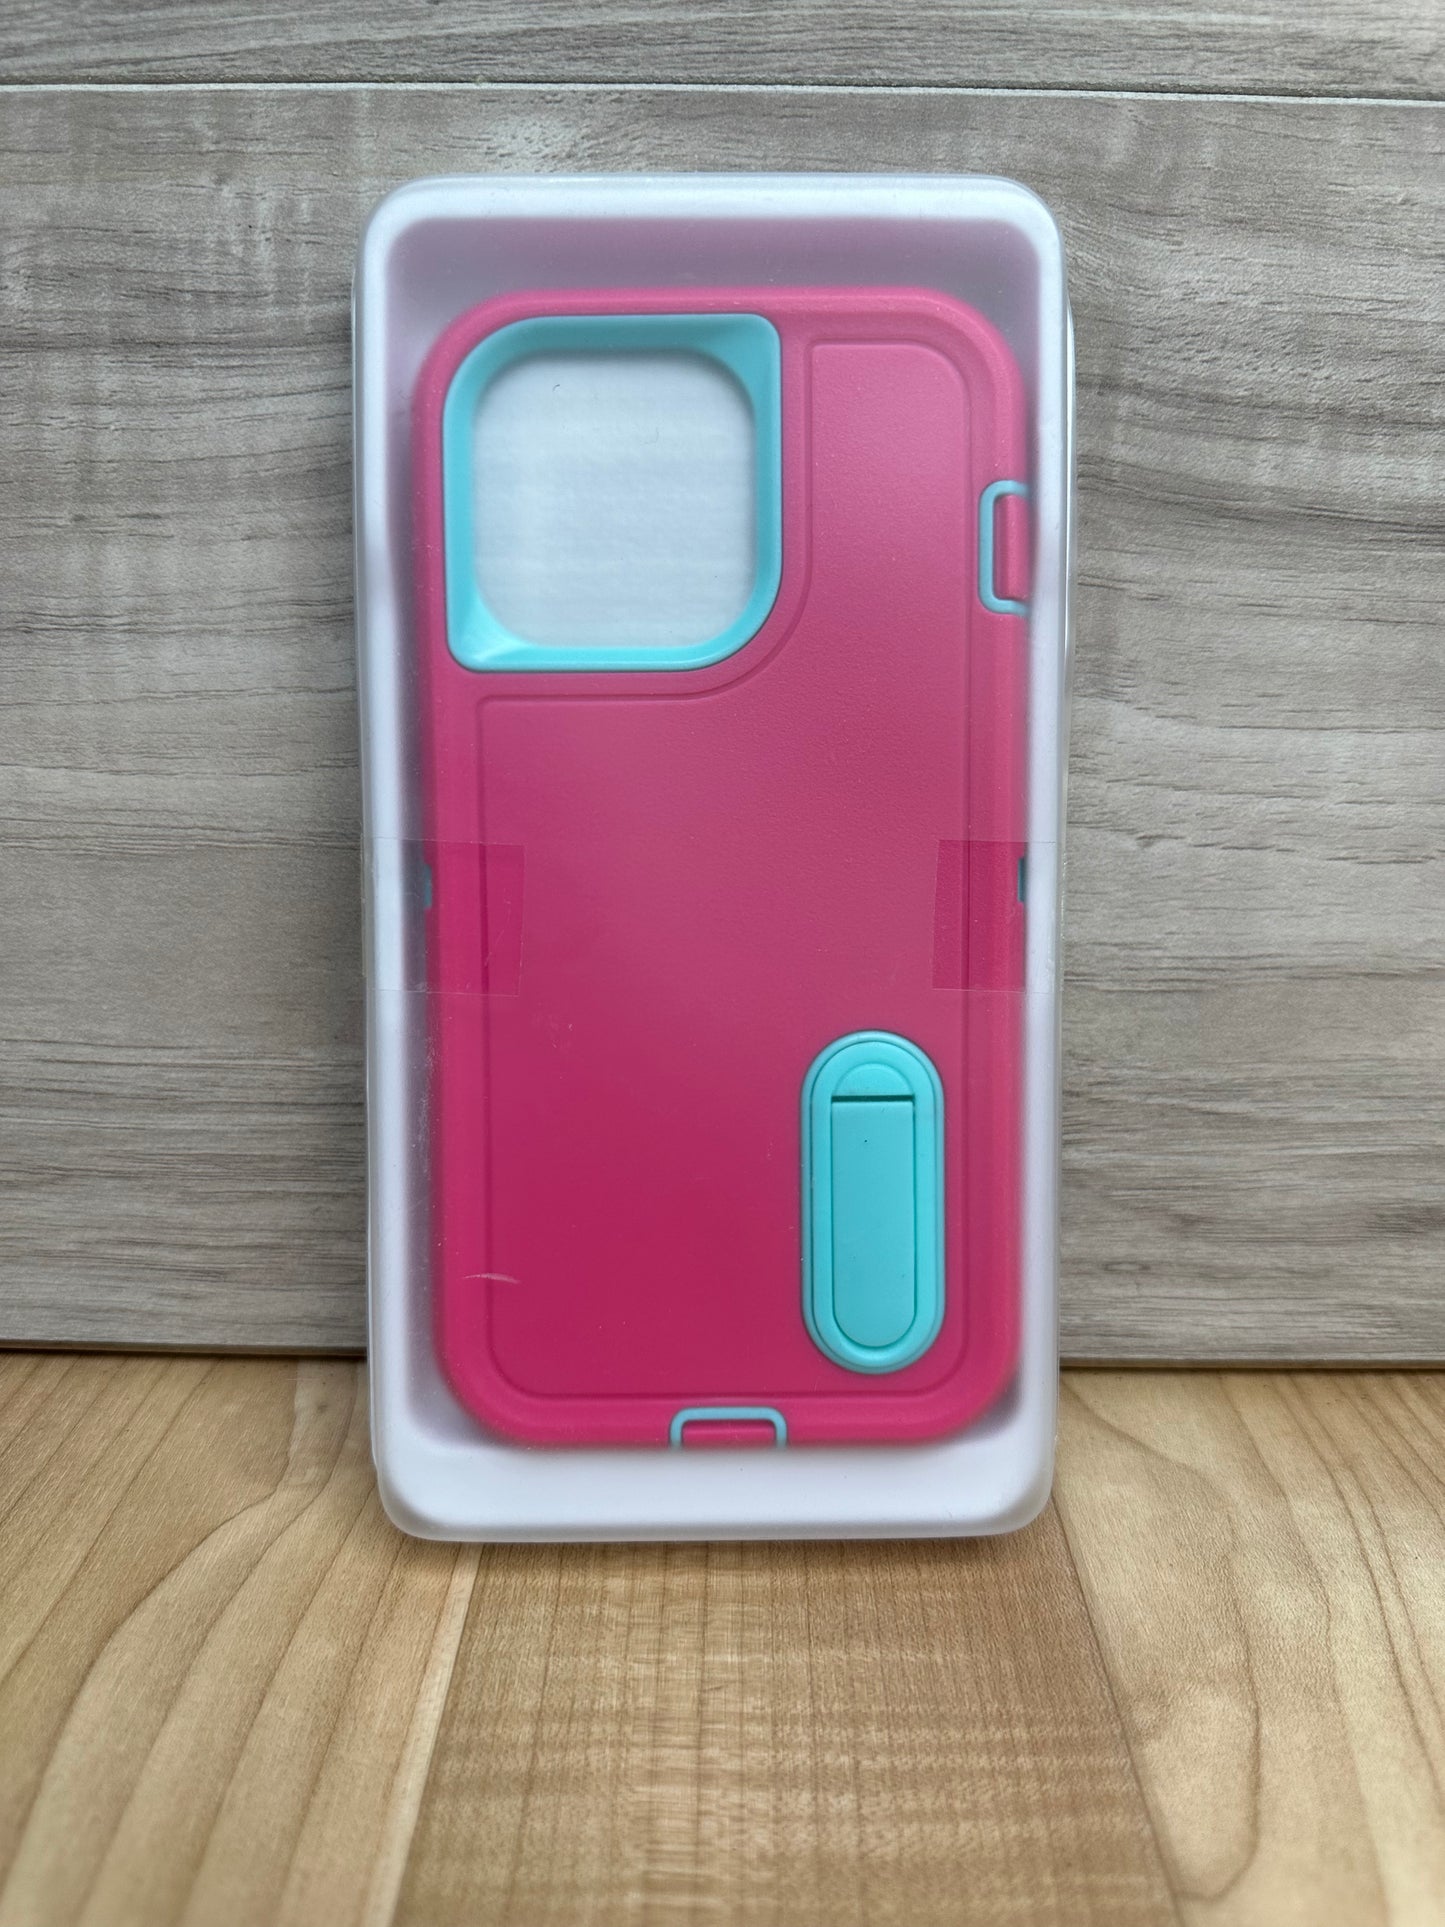 ymxdmd Case is Specially Designed for iPhone 13 Pro 6.1 Inch, Full Body Protection Heavy Duty Shock Absorbing 3 in 1 Silicone Rubber Built-in Stand